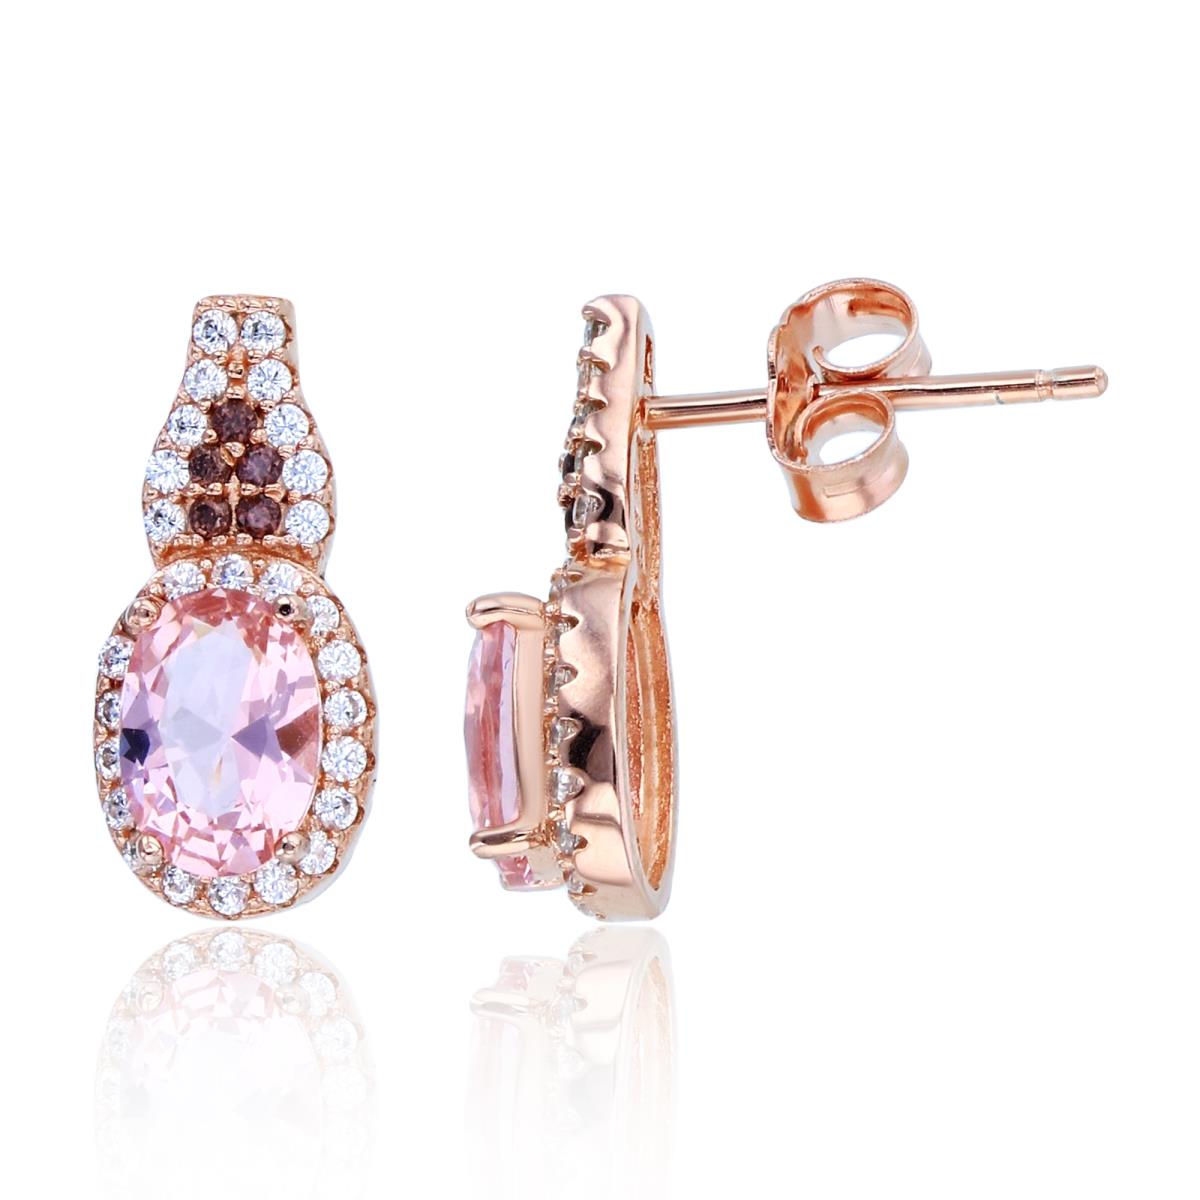 Sterling Silver+1Micron Rose Gold 7x5mm Ov Morganite CZ & Rnd Brown/White CZ Oval Halo Earrings